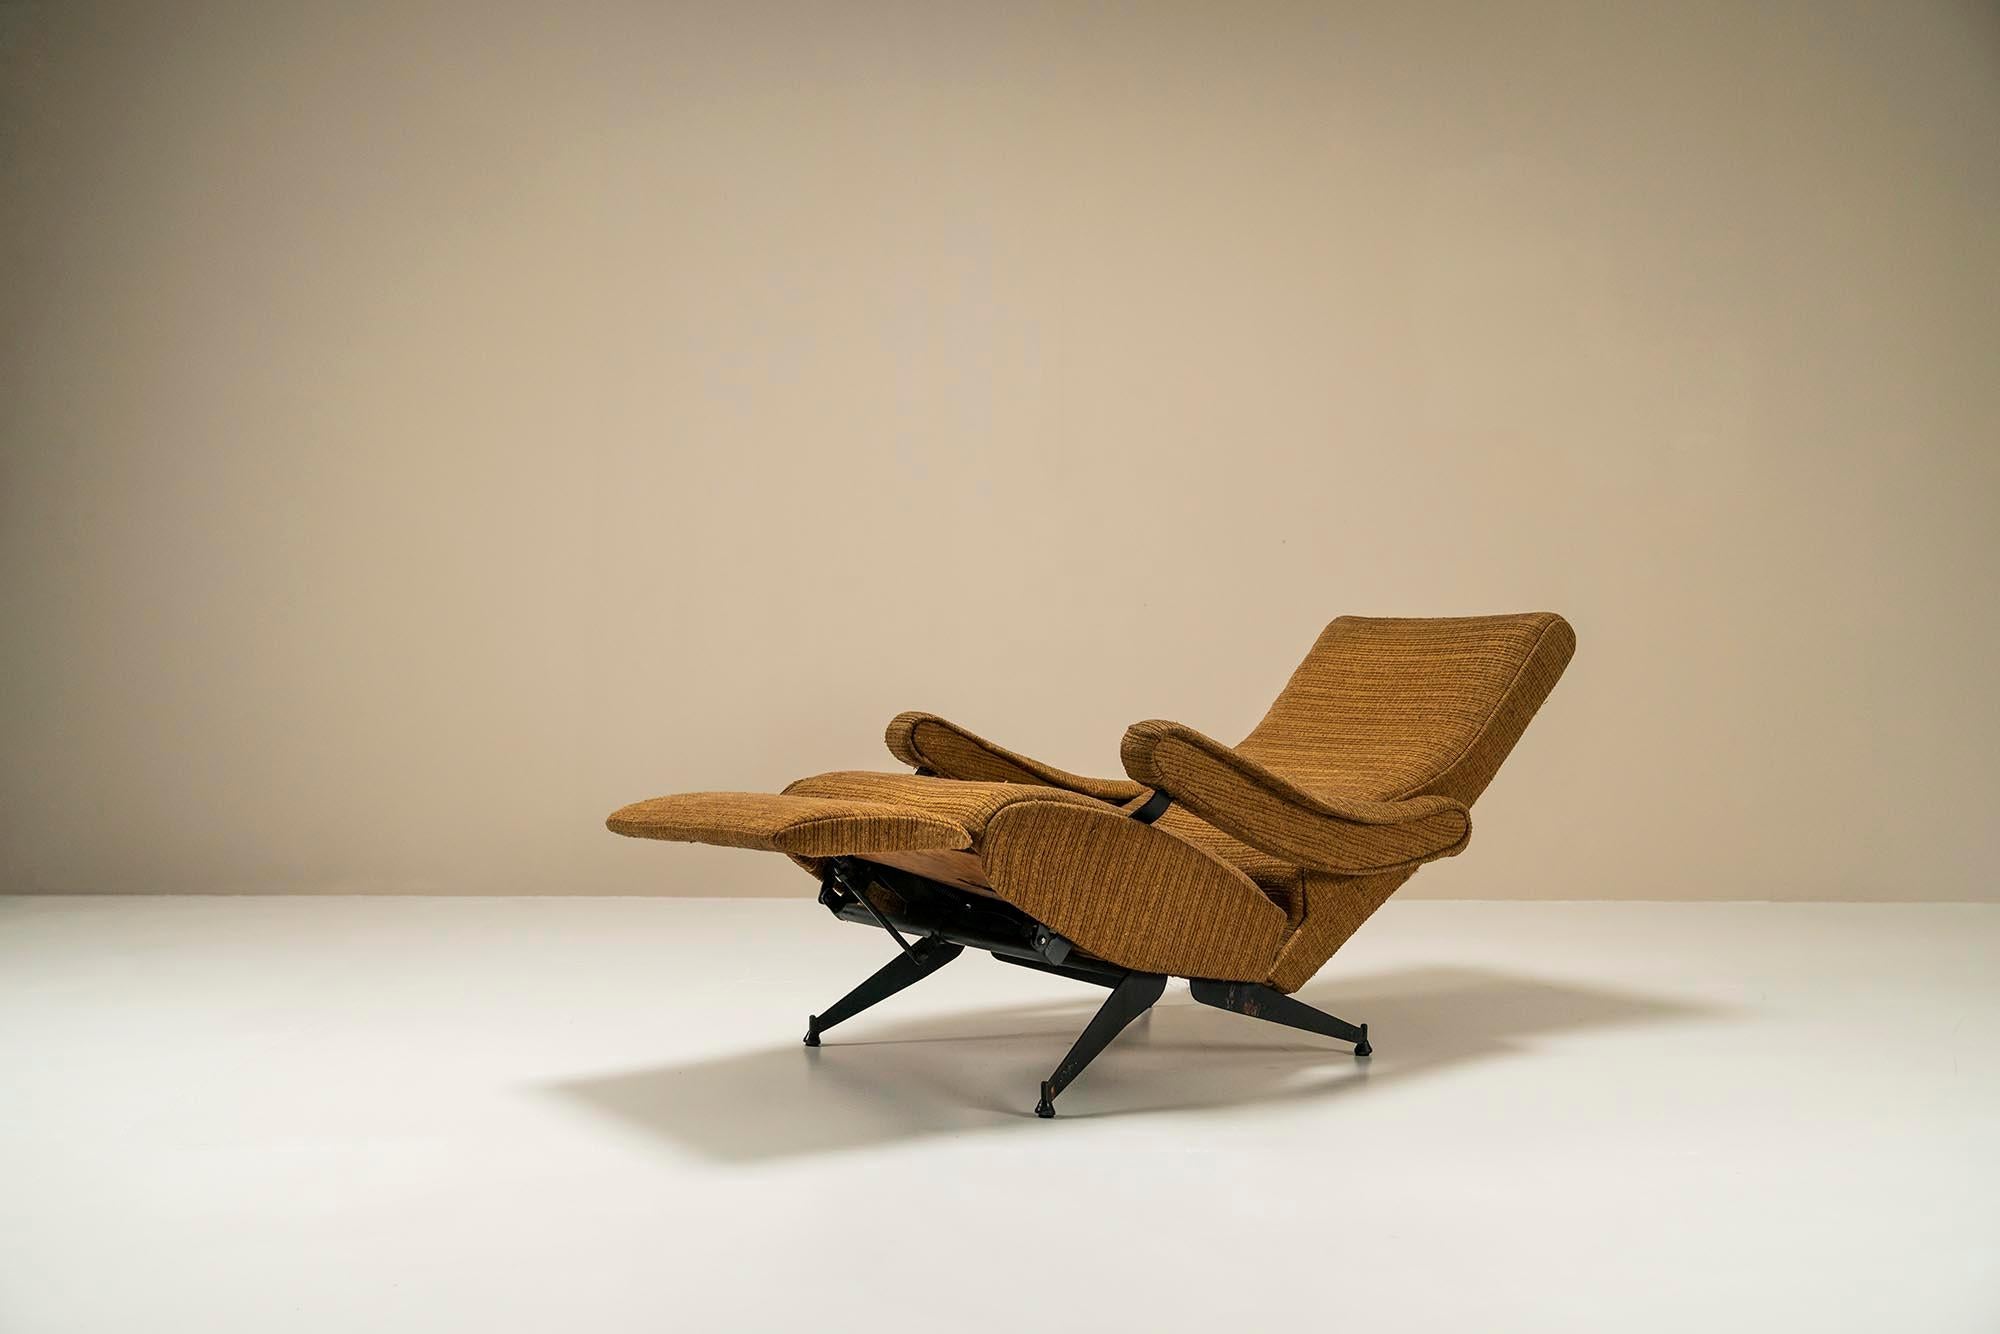 Reclining Armchair in Steel and Fabric by Nello Pini for Novarredo, Italy, 1959 For Sale 4